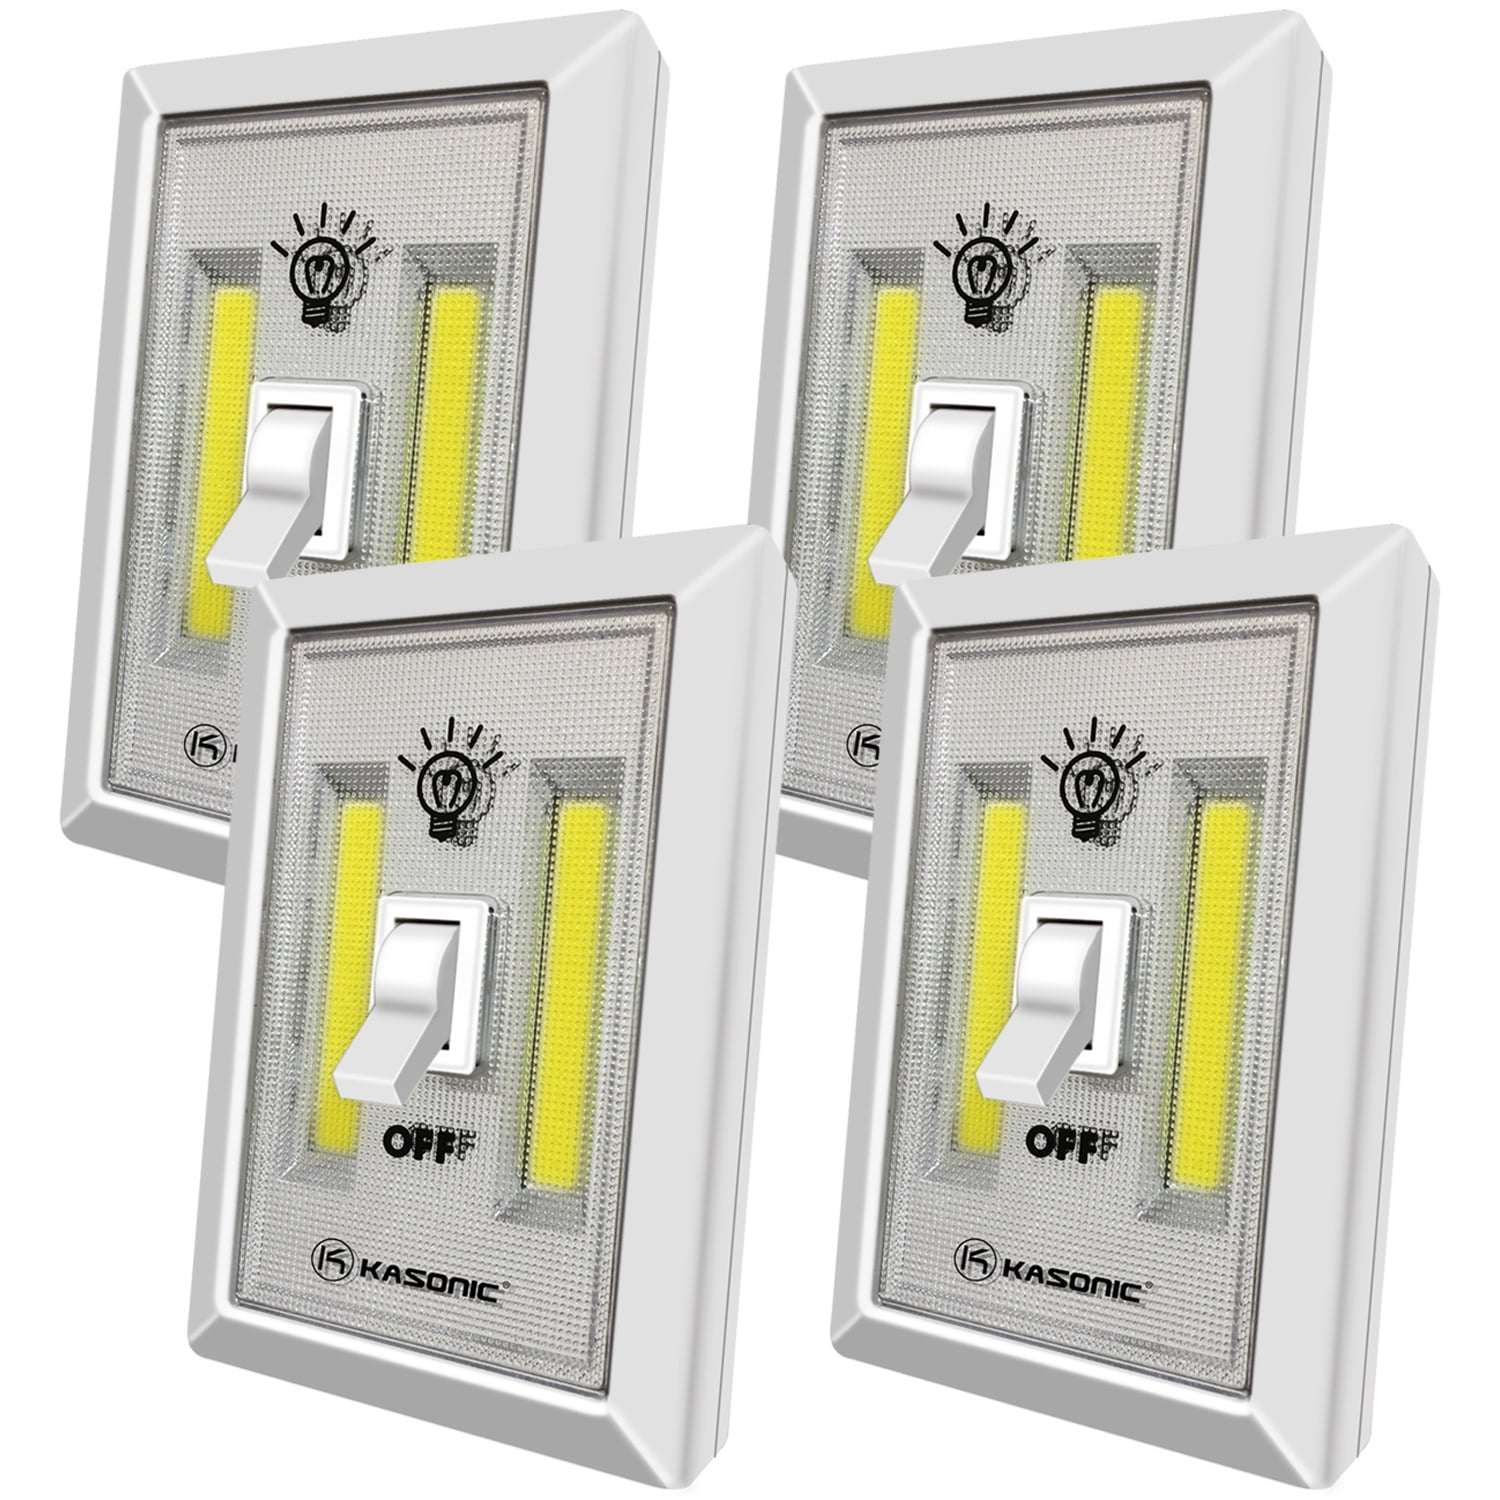 Wireless Cob LED 200 Lumens Light Switch White 3 AAA Batteries Included NEW 